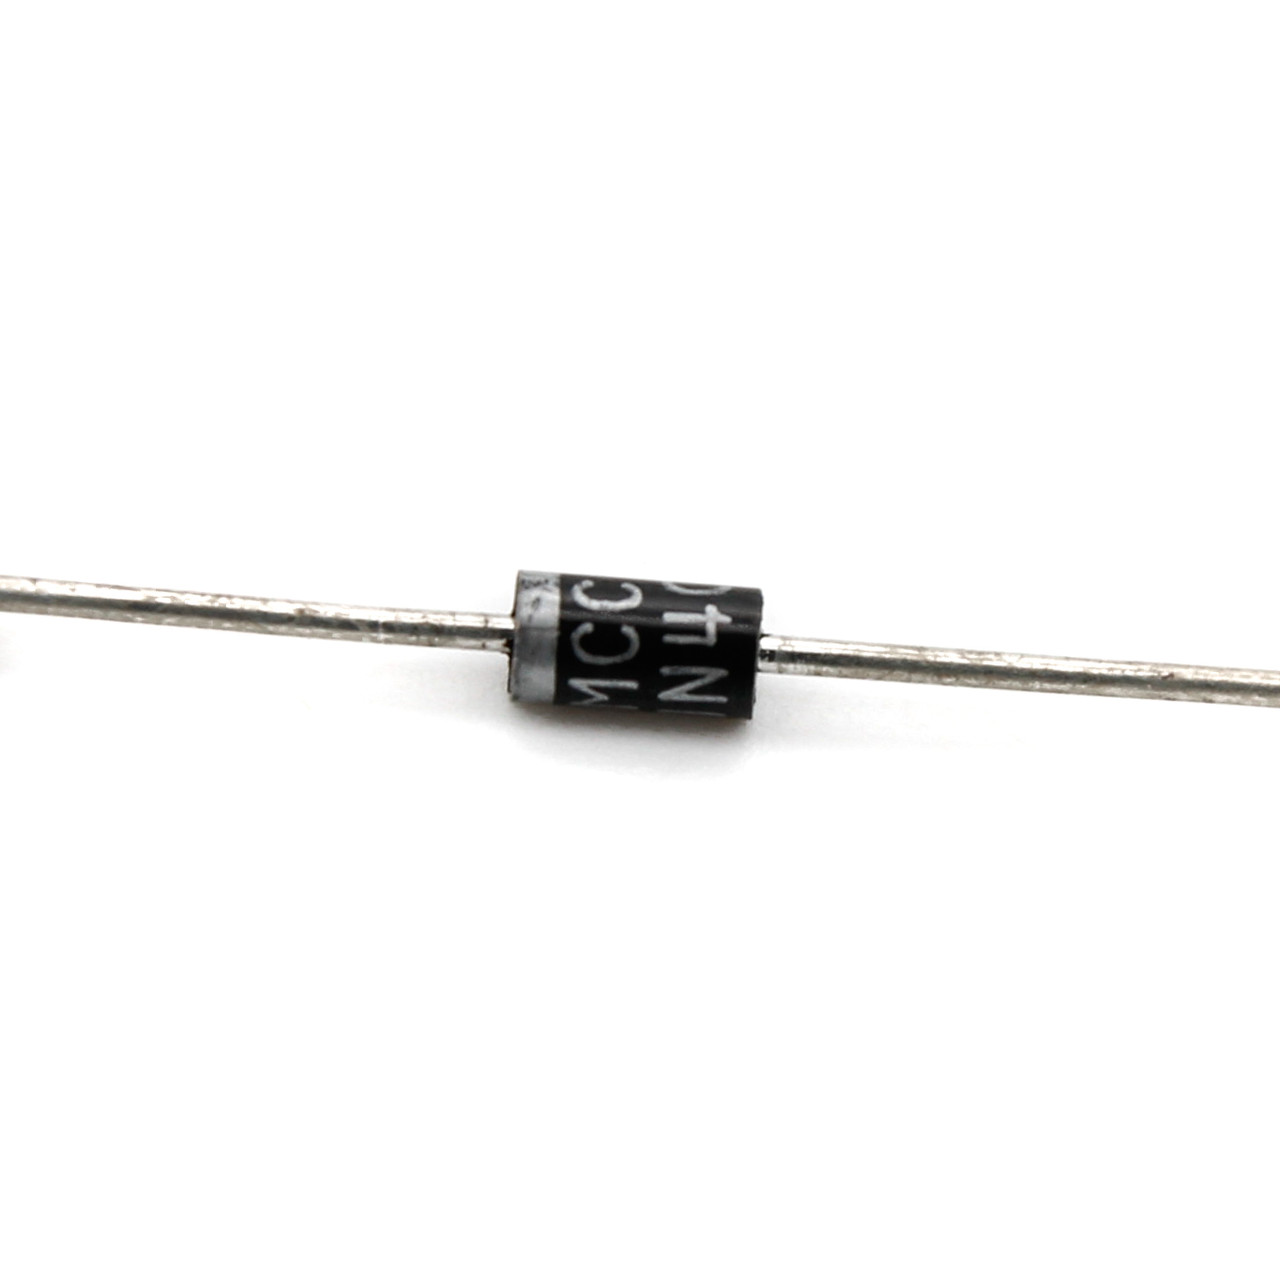 1N4007 - Rectifier Diode - 10 pack